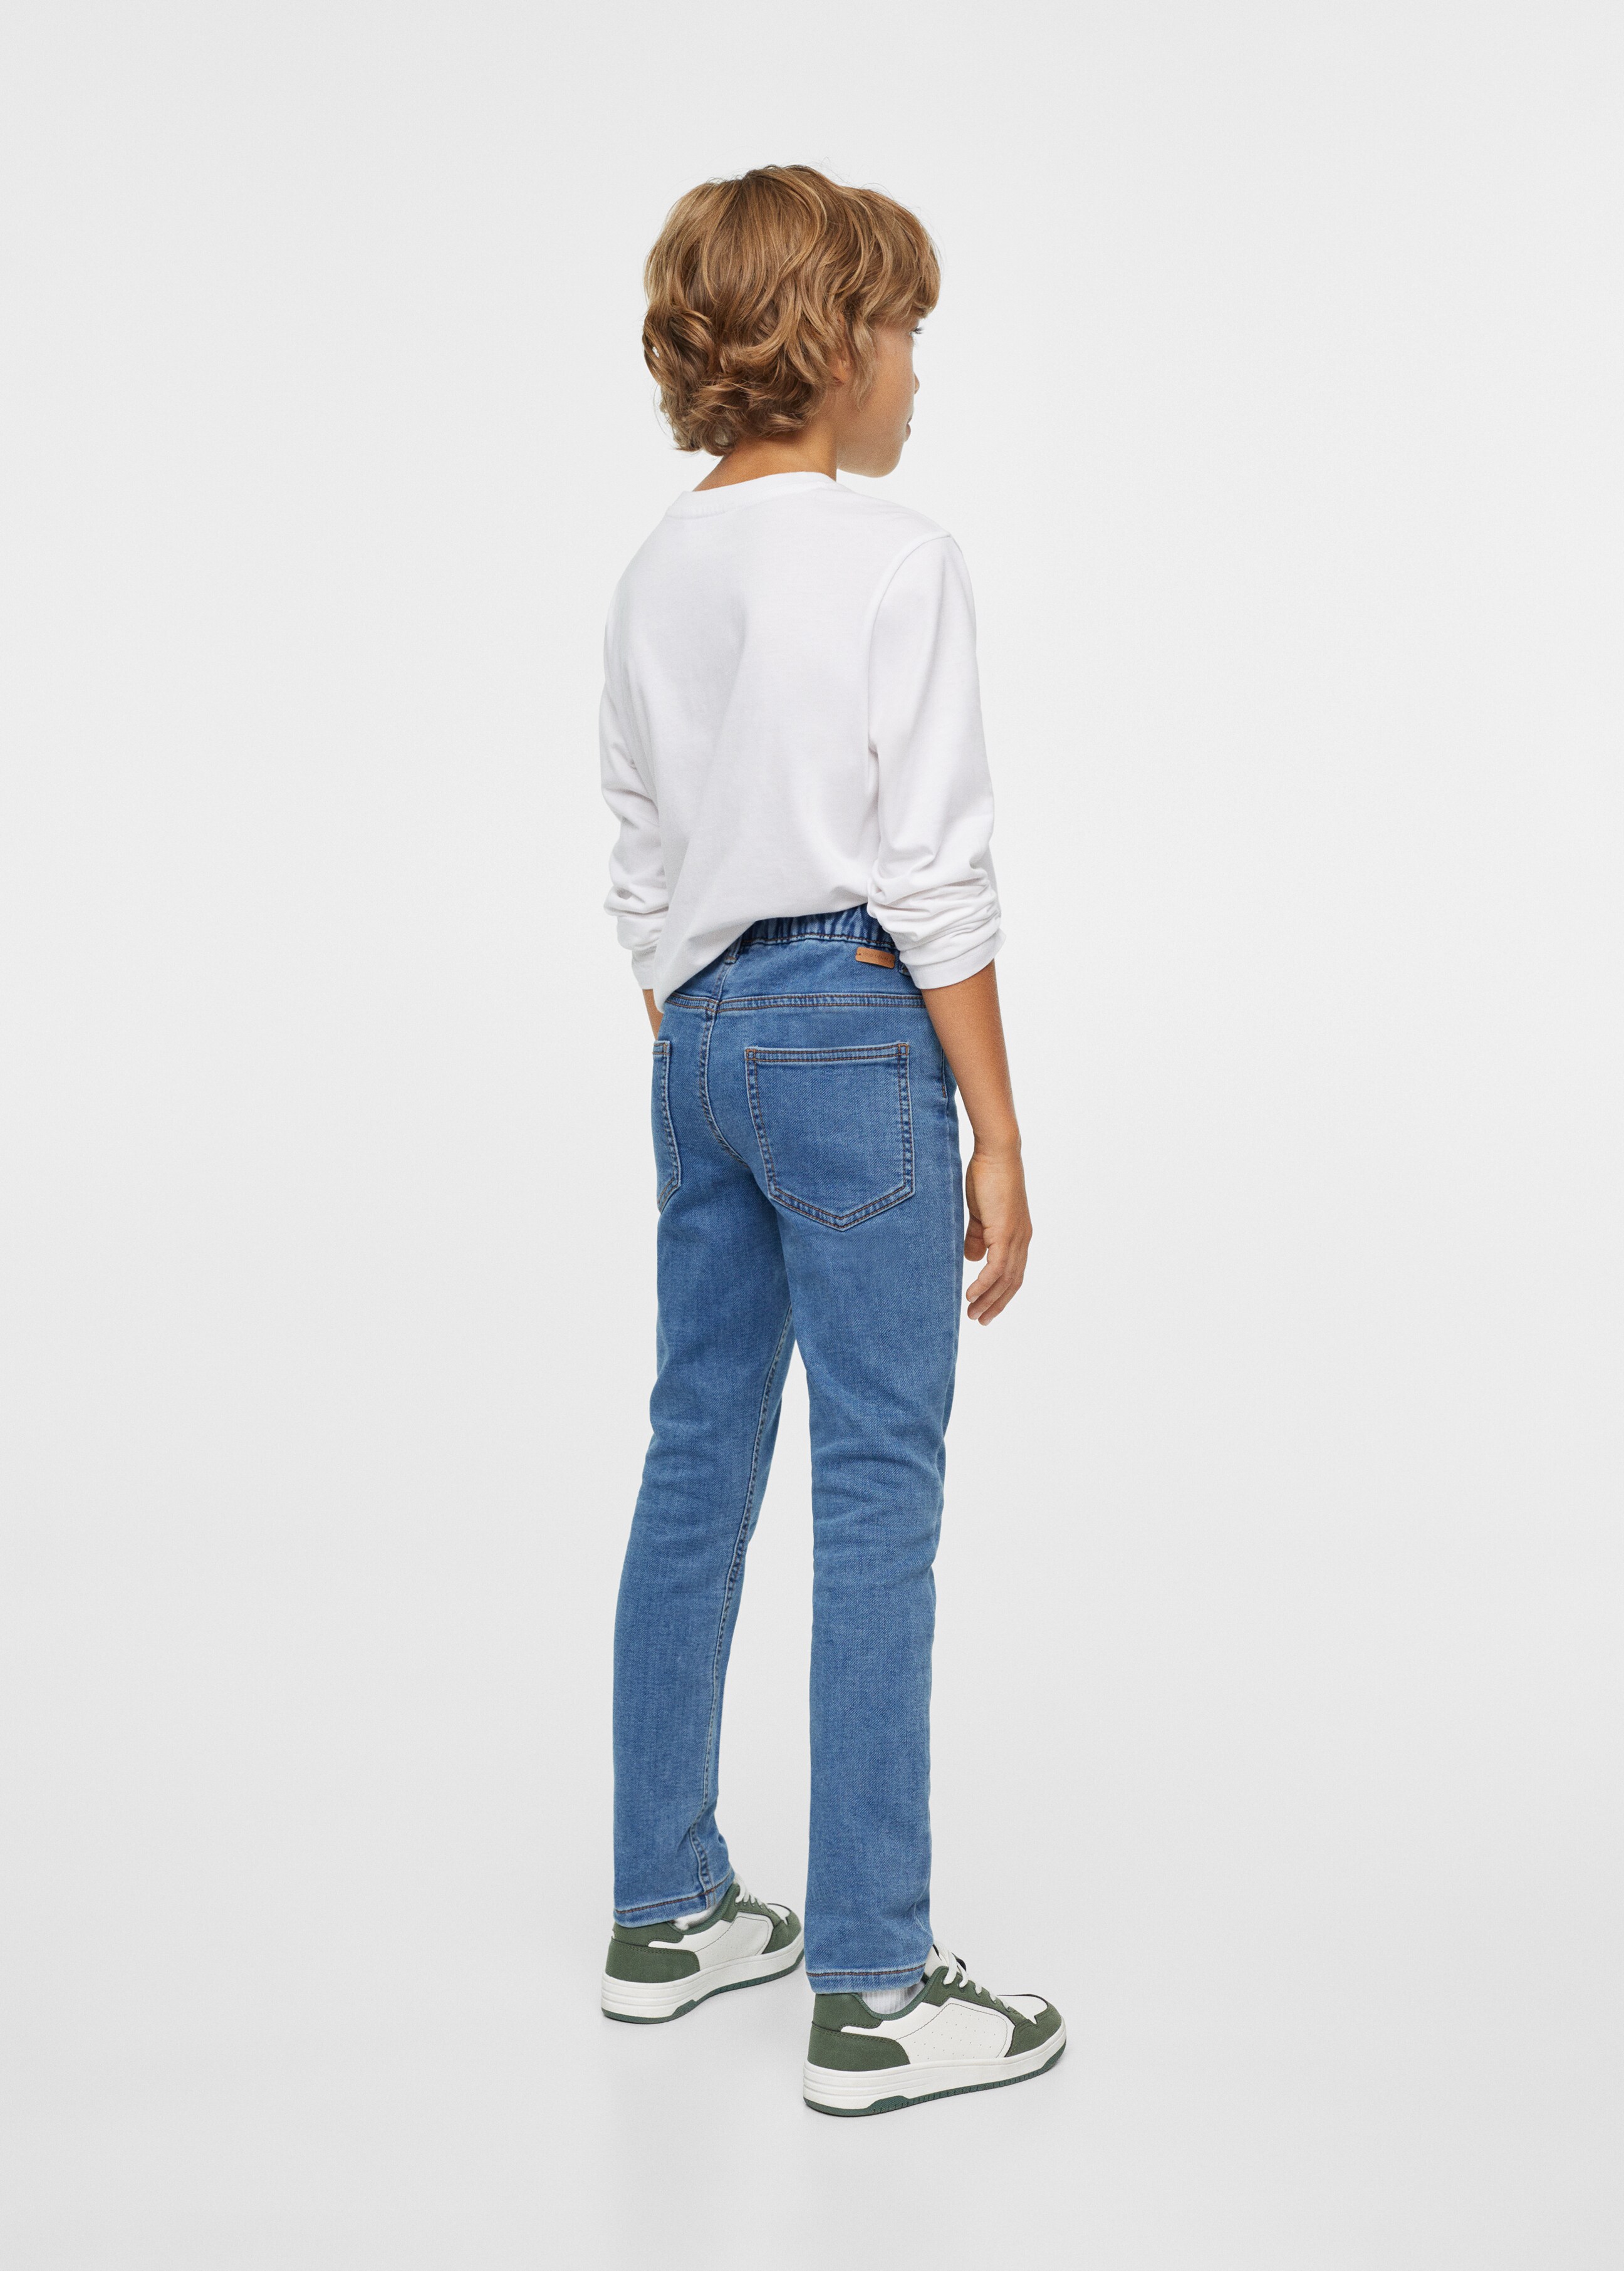 Lace drawstring waist jeans - Details of the article 3